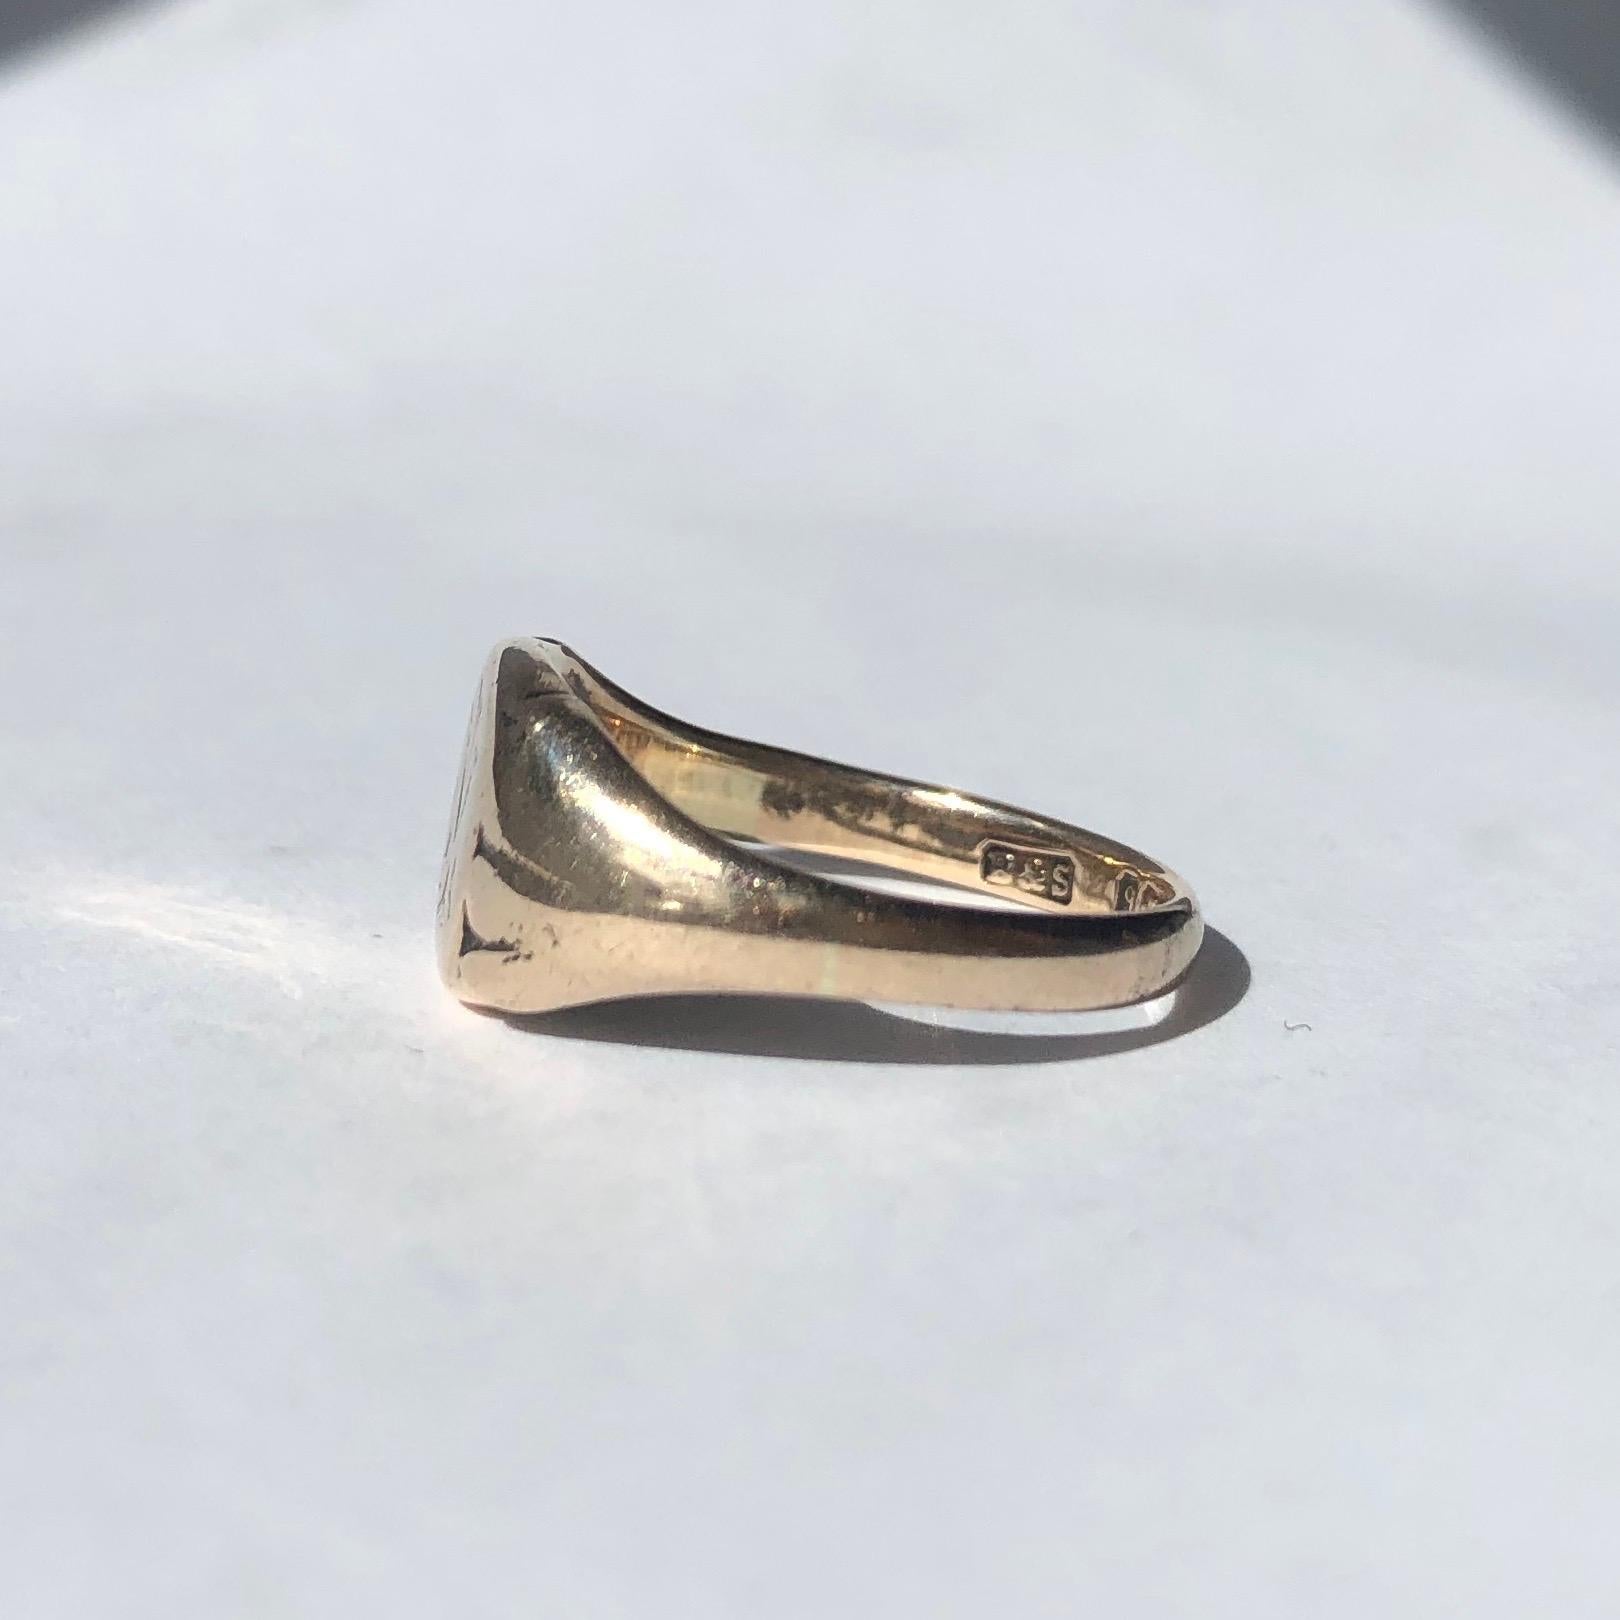 This signet ring has a chunky feel to it and is modelled in 9ct gold. The face has initials reading 'MI' or 'IM' engraved into it. Made in Birmingham, England. 

Ring Size: L or 5 3/4
Widest Point: 9mm 

Weight: 3.52g